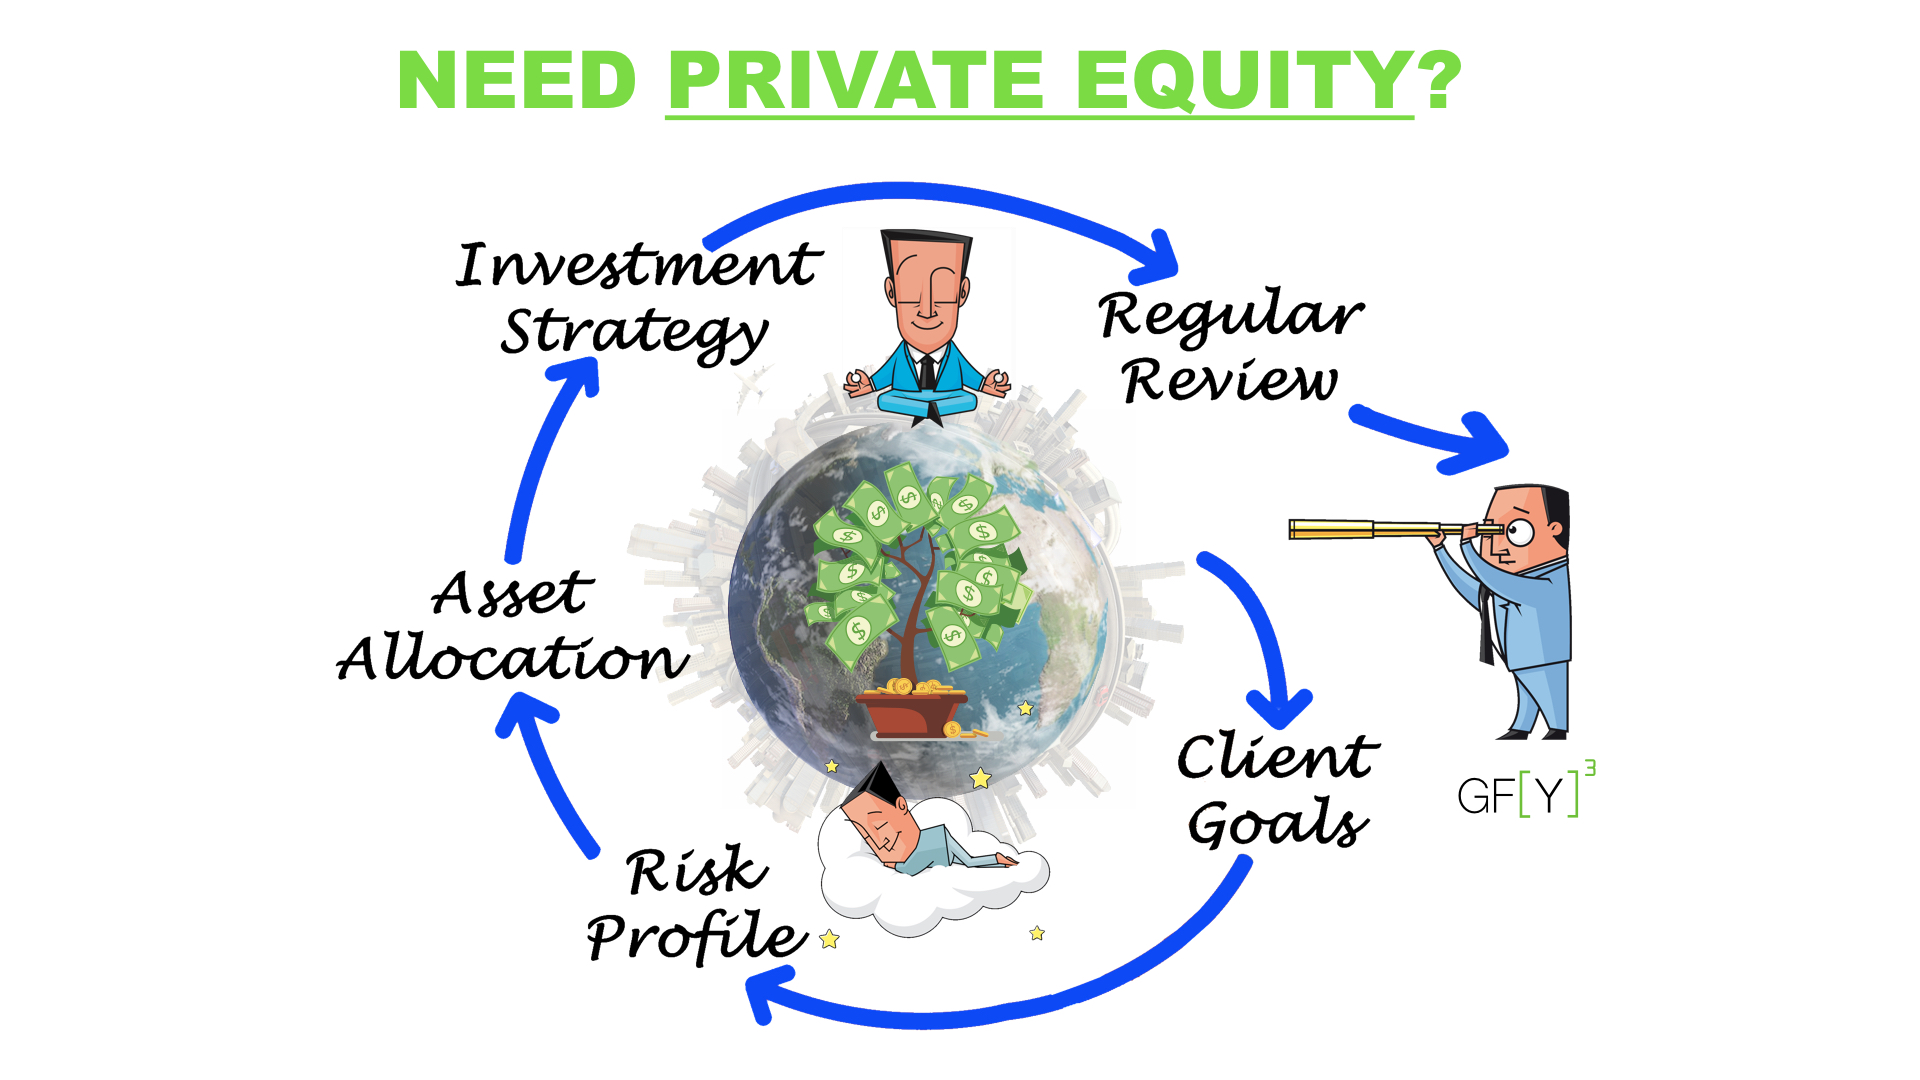 Private Equity Partners